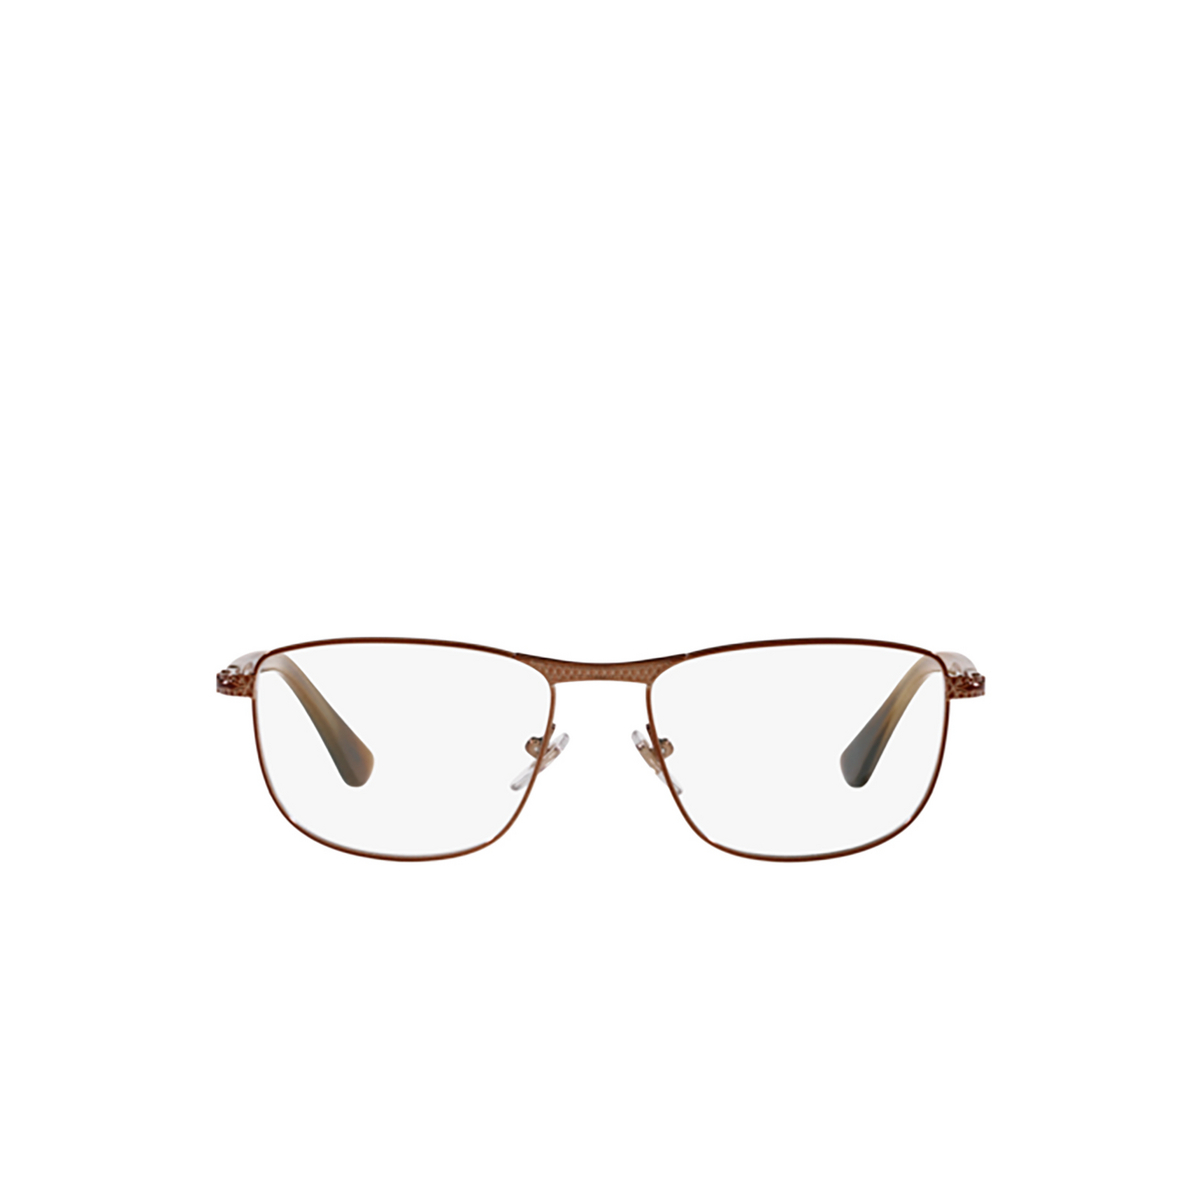 Persol PO1001V Eyeglasses 1124 Brown - front view